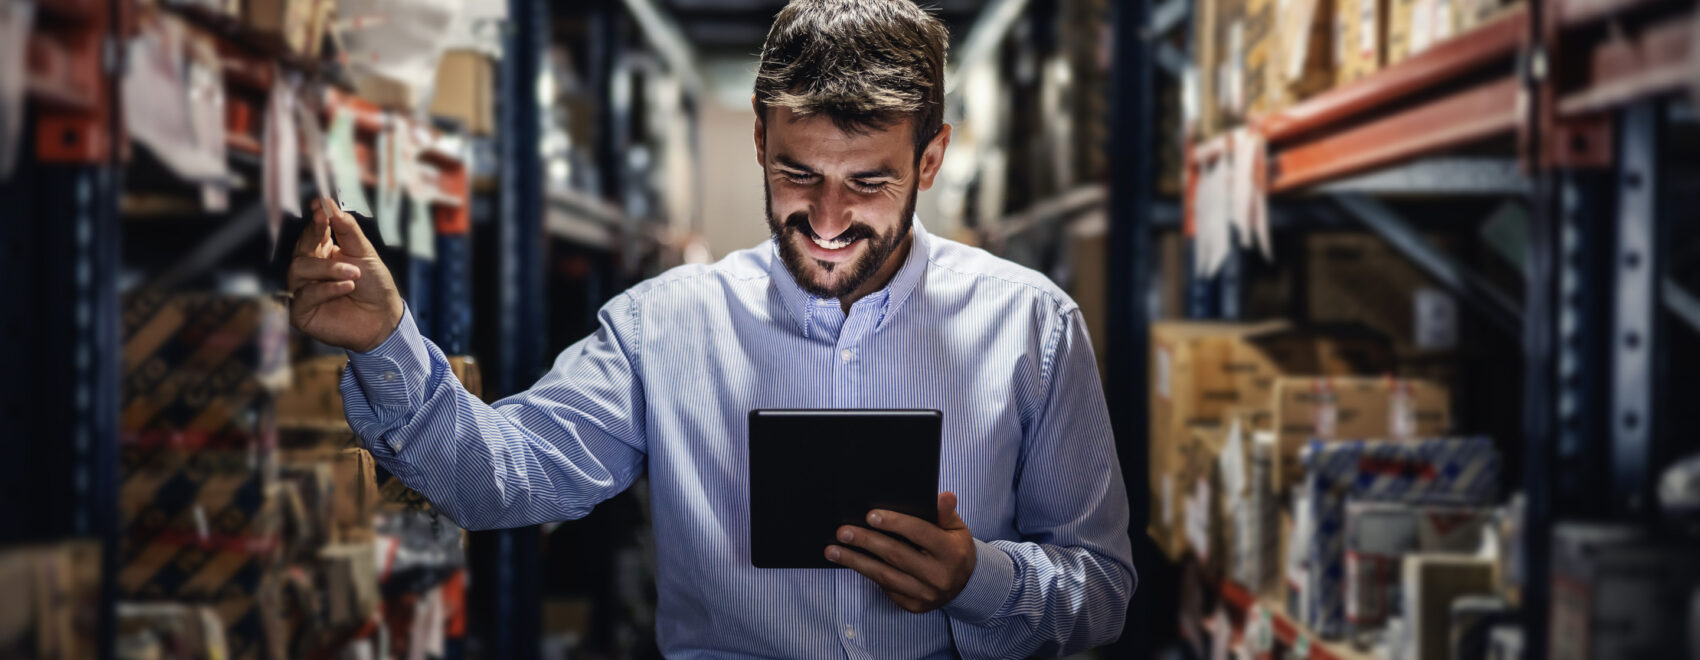 Smiling bearded supervisor standing in warehouse full of boxes a